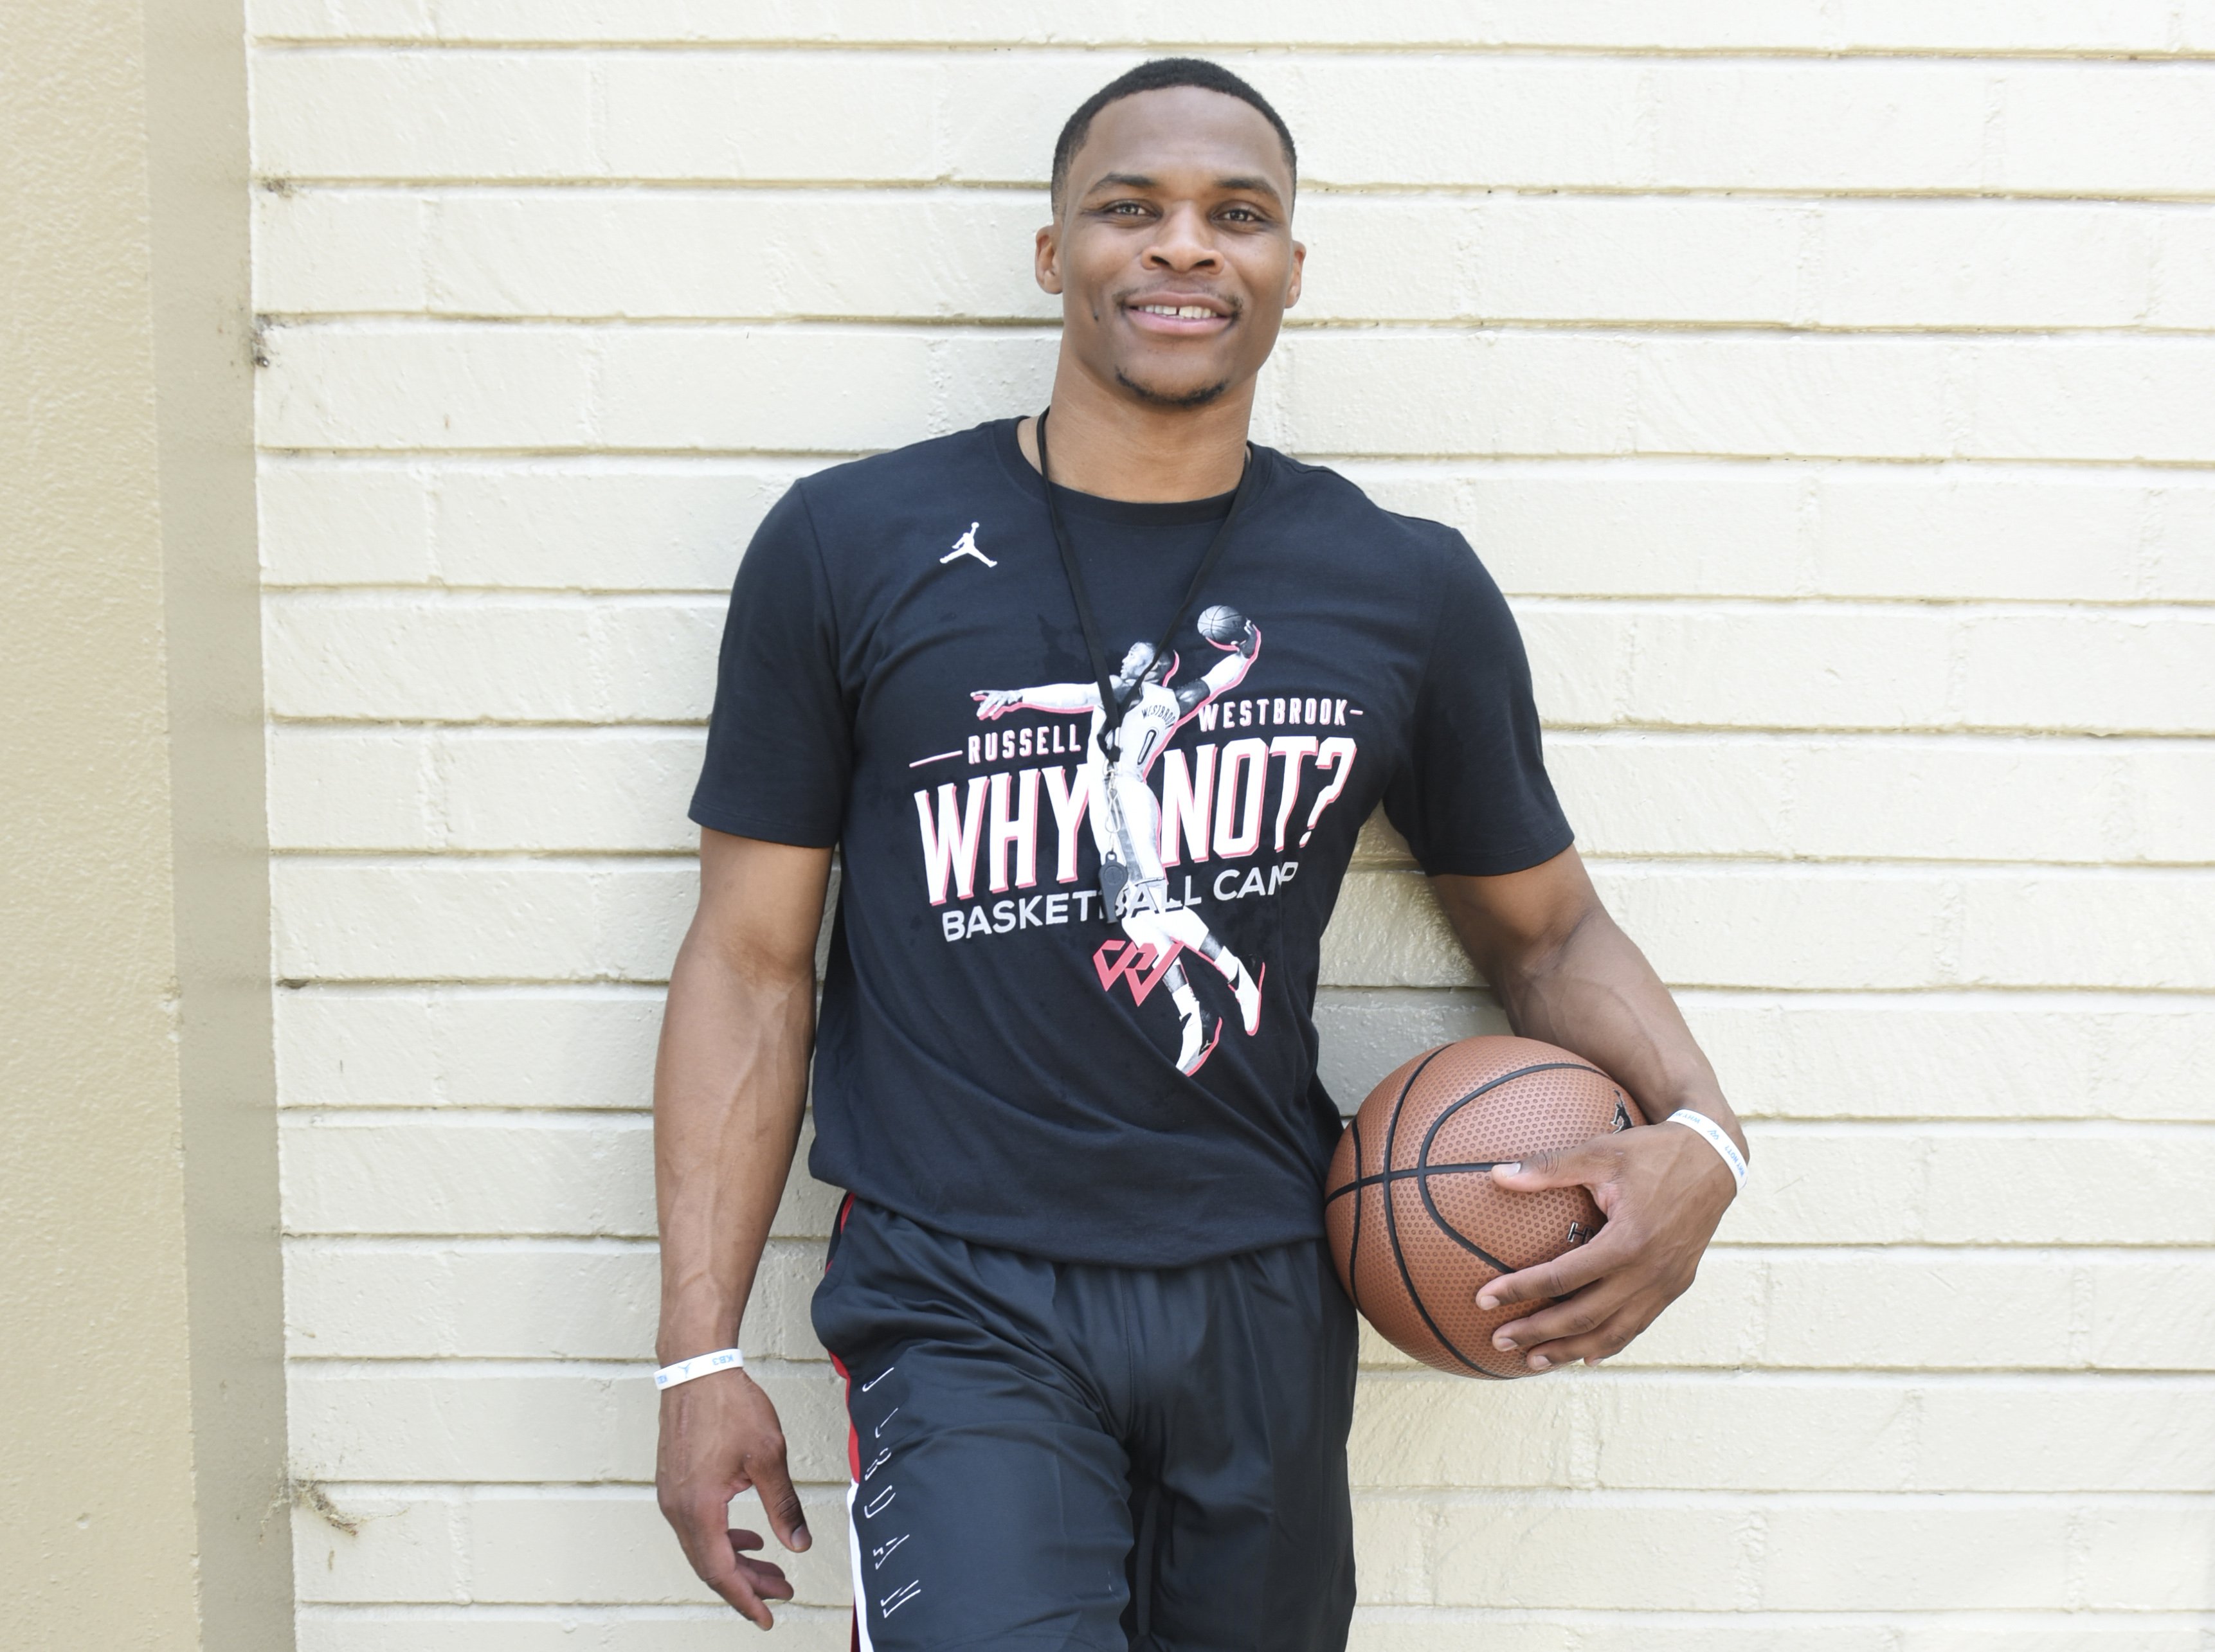 Russell Westbrook attends the 6th Annual Russell Westbrook Why Not? Basketball Camp on August 2, 2018, in Los Angeles, California. | Source: Getty Images.